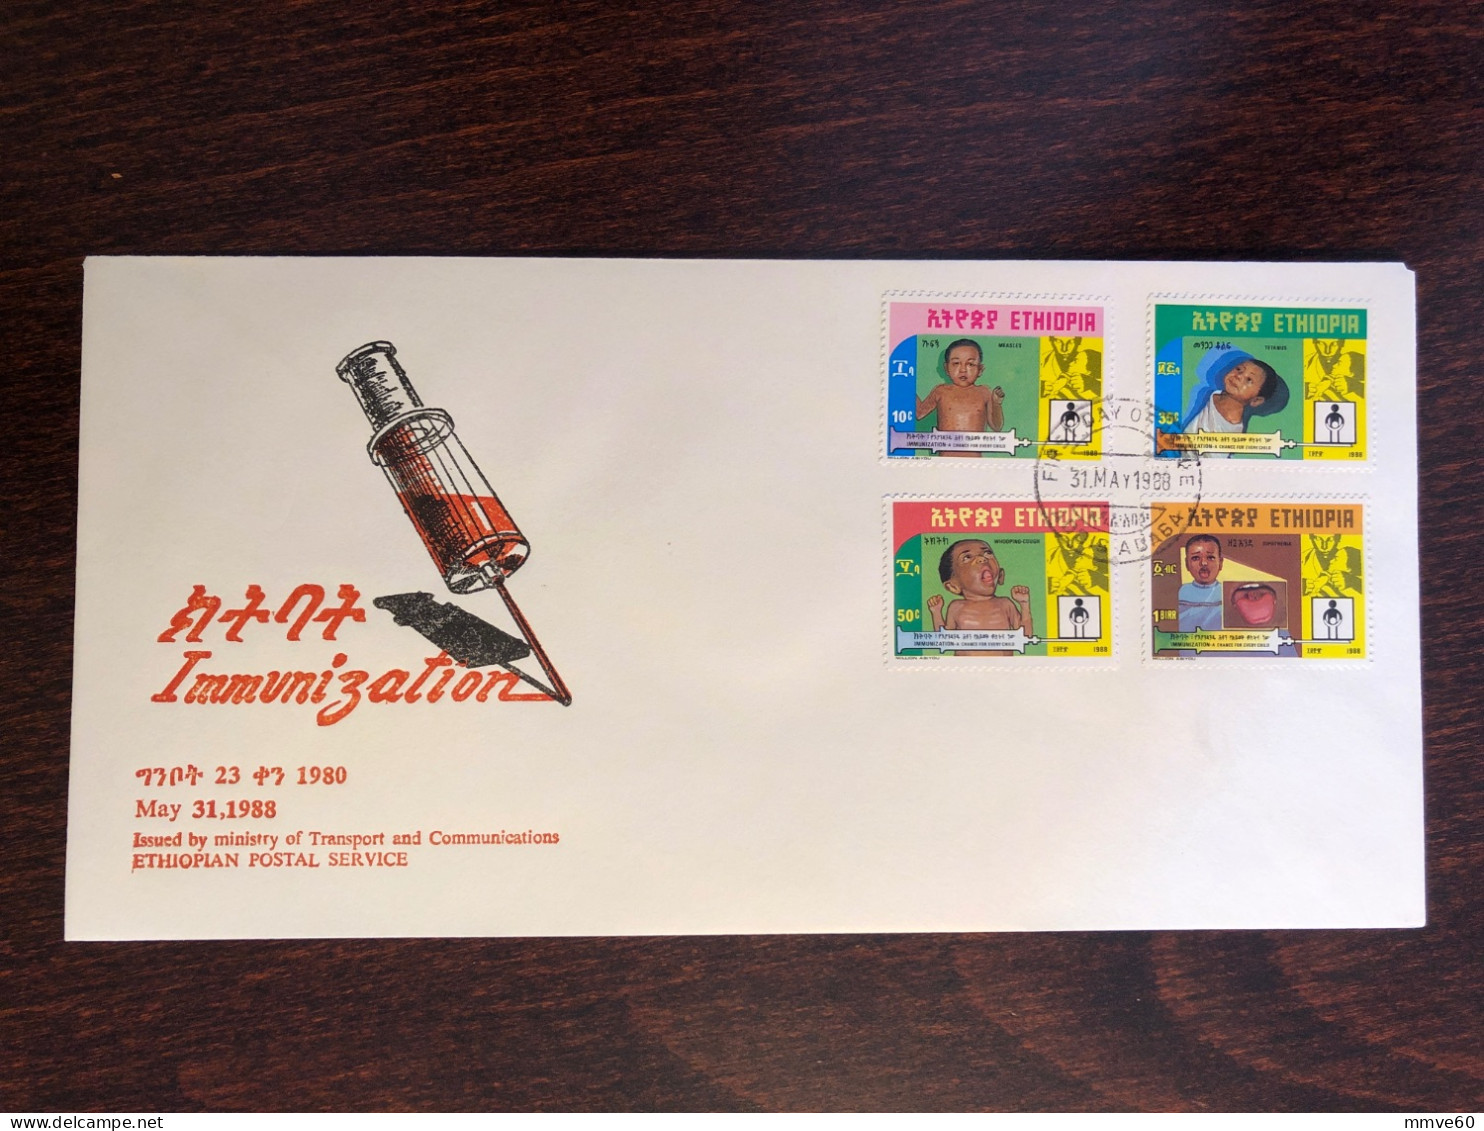 ETHIOPIA FDC COVER 1988 YEAR IMMUNIZATION - MEASLES, TETANUS, DIPHTHERIA, WHOOPING COUGH HEALTH MEDICINE STAMPS - Ethiopia